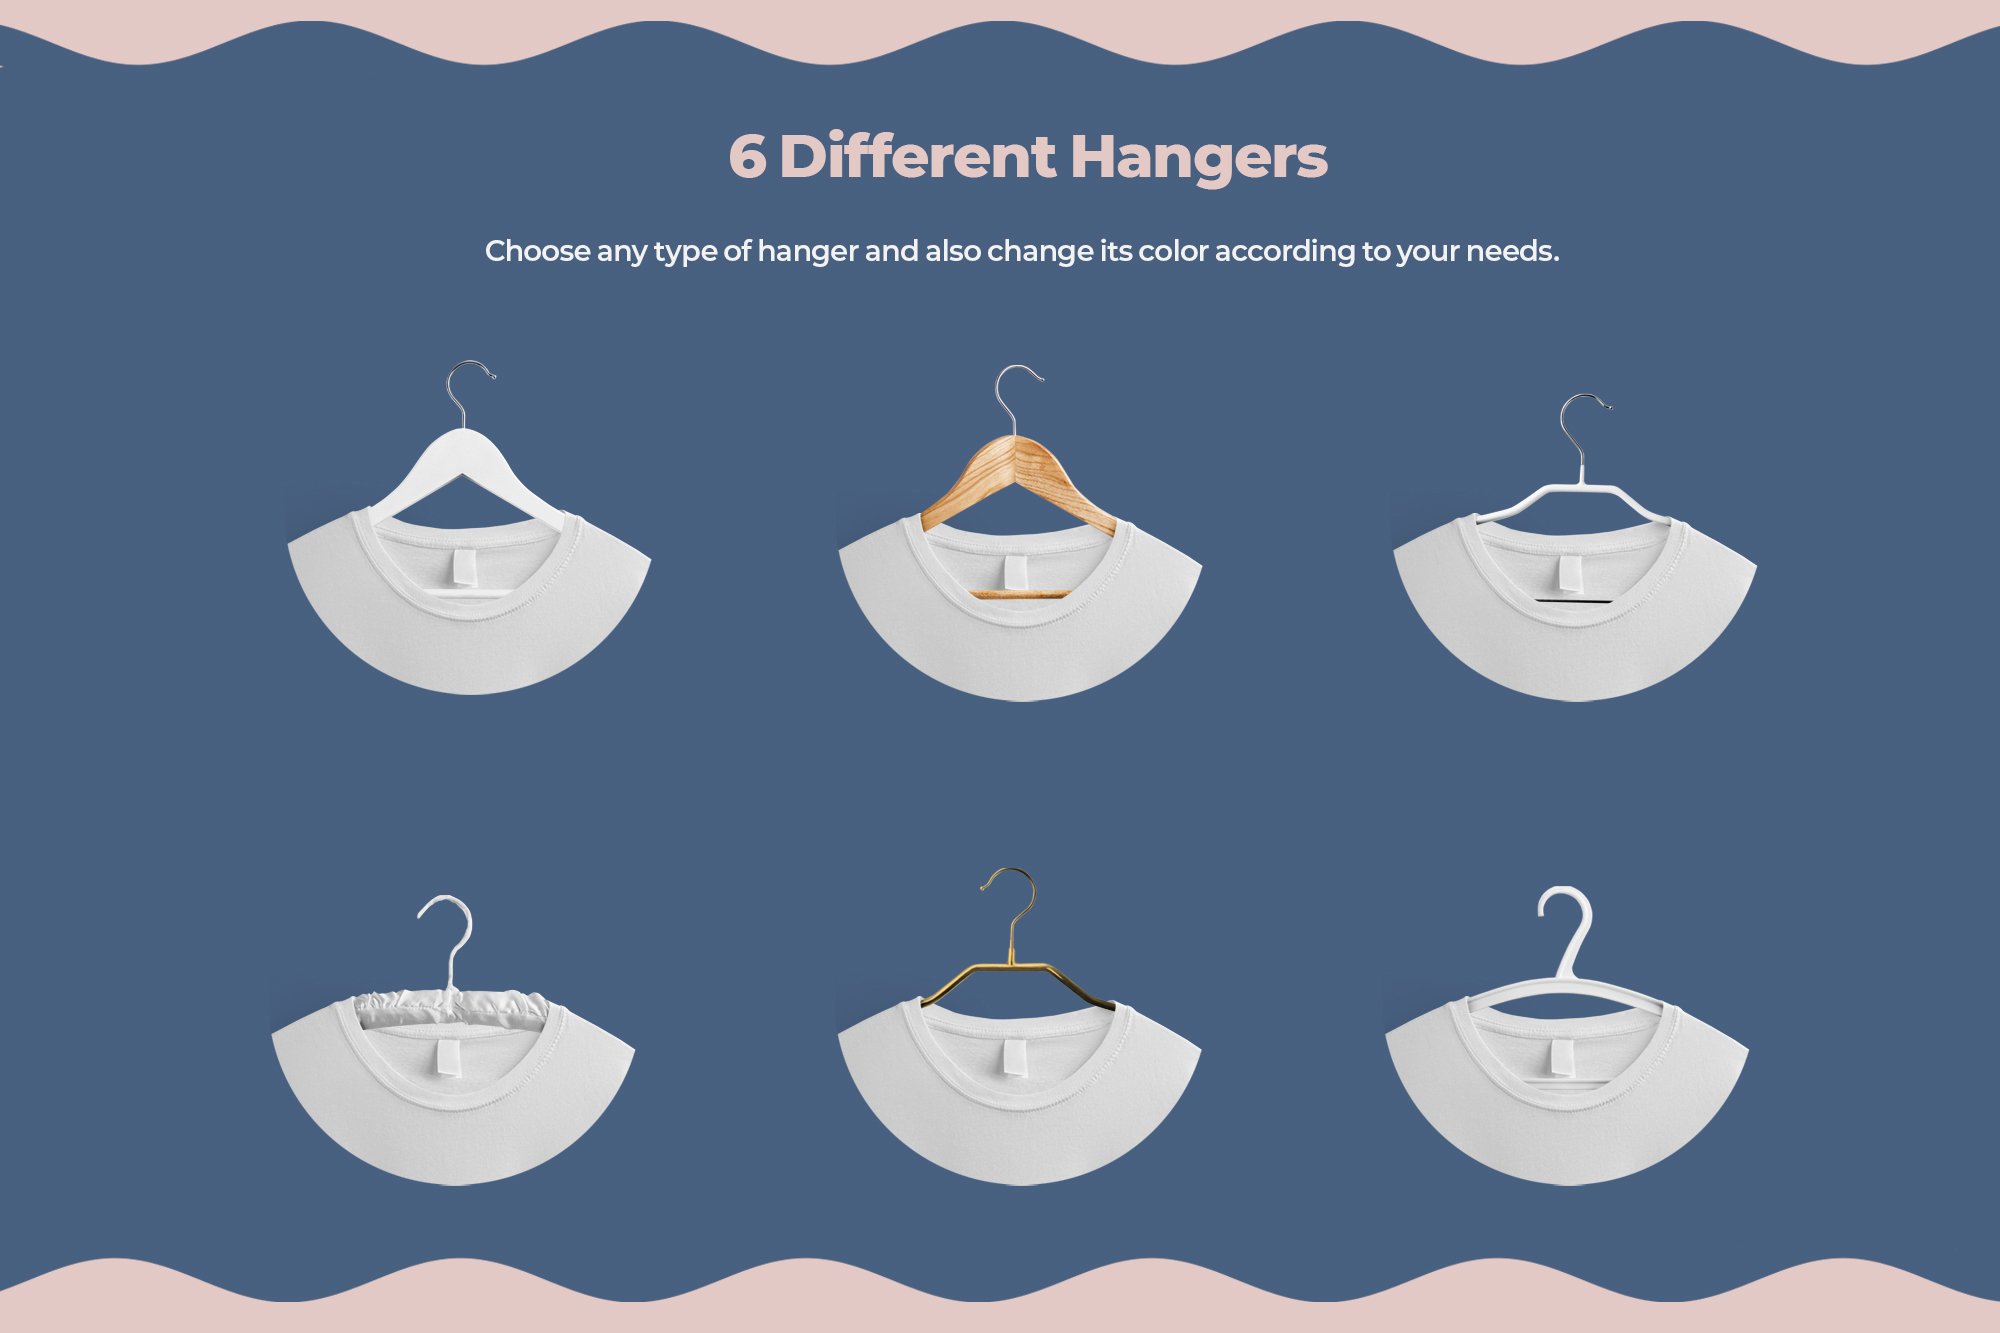 Six different white hangers.